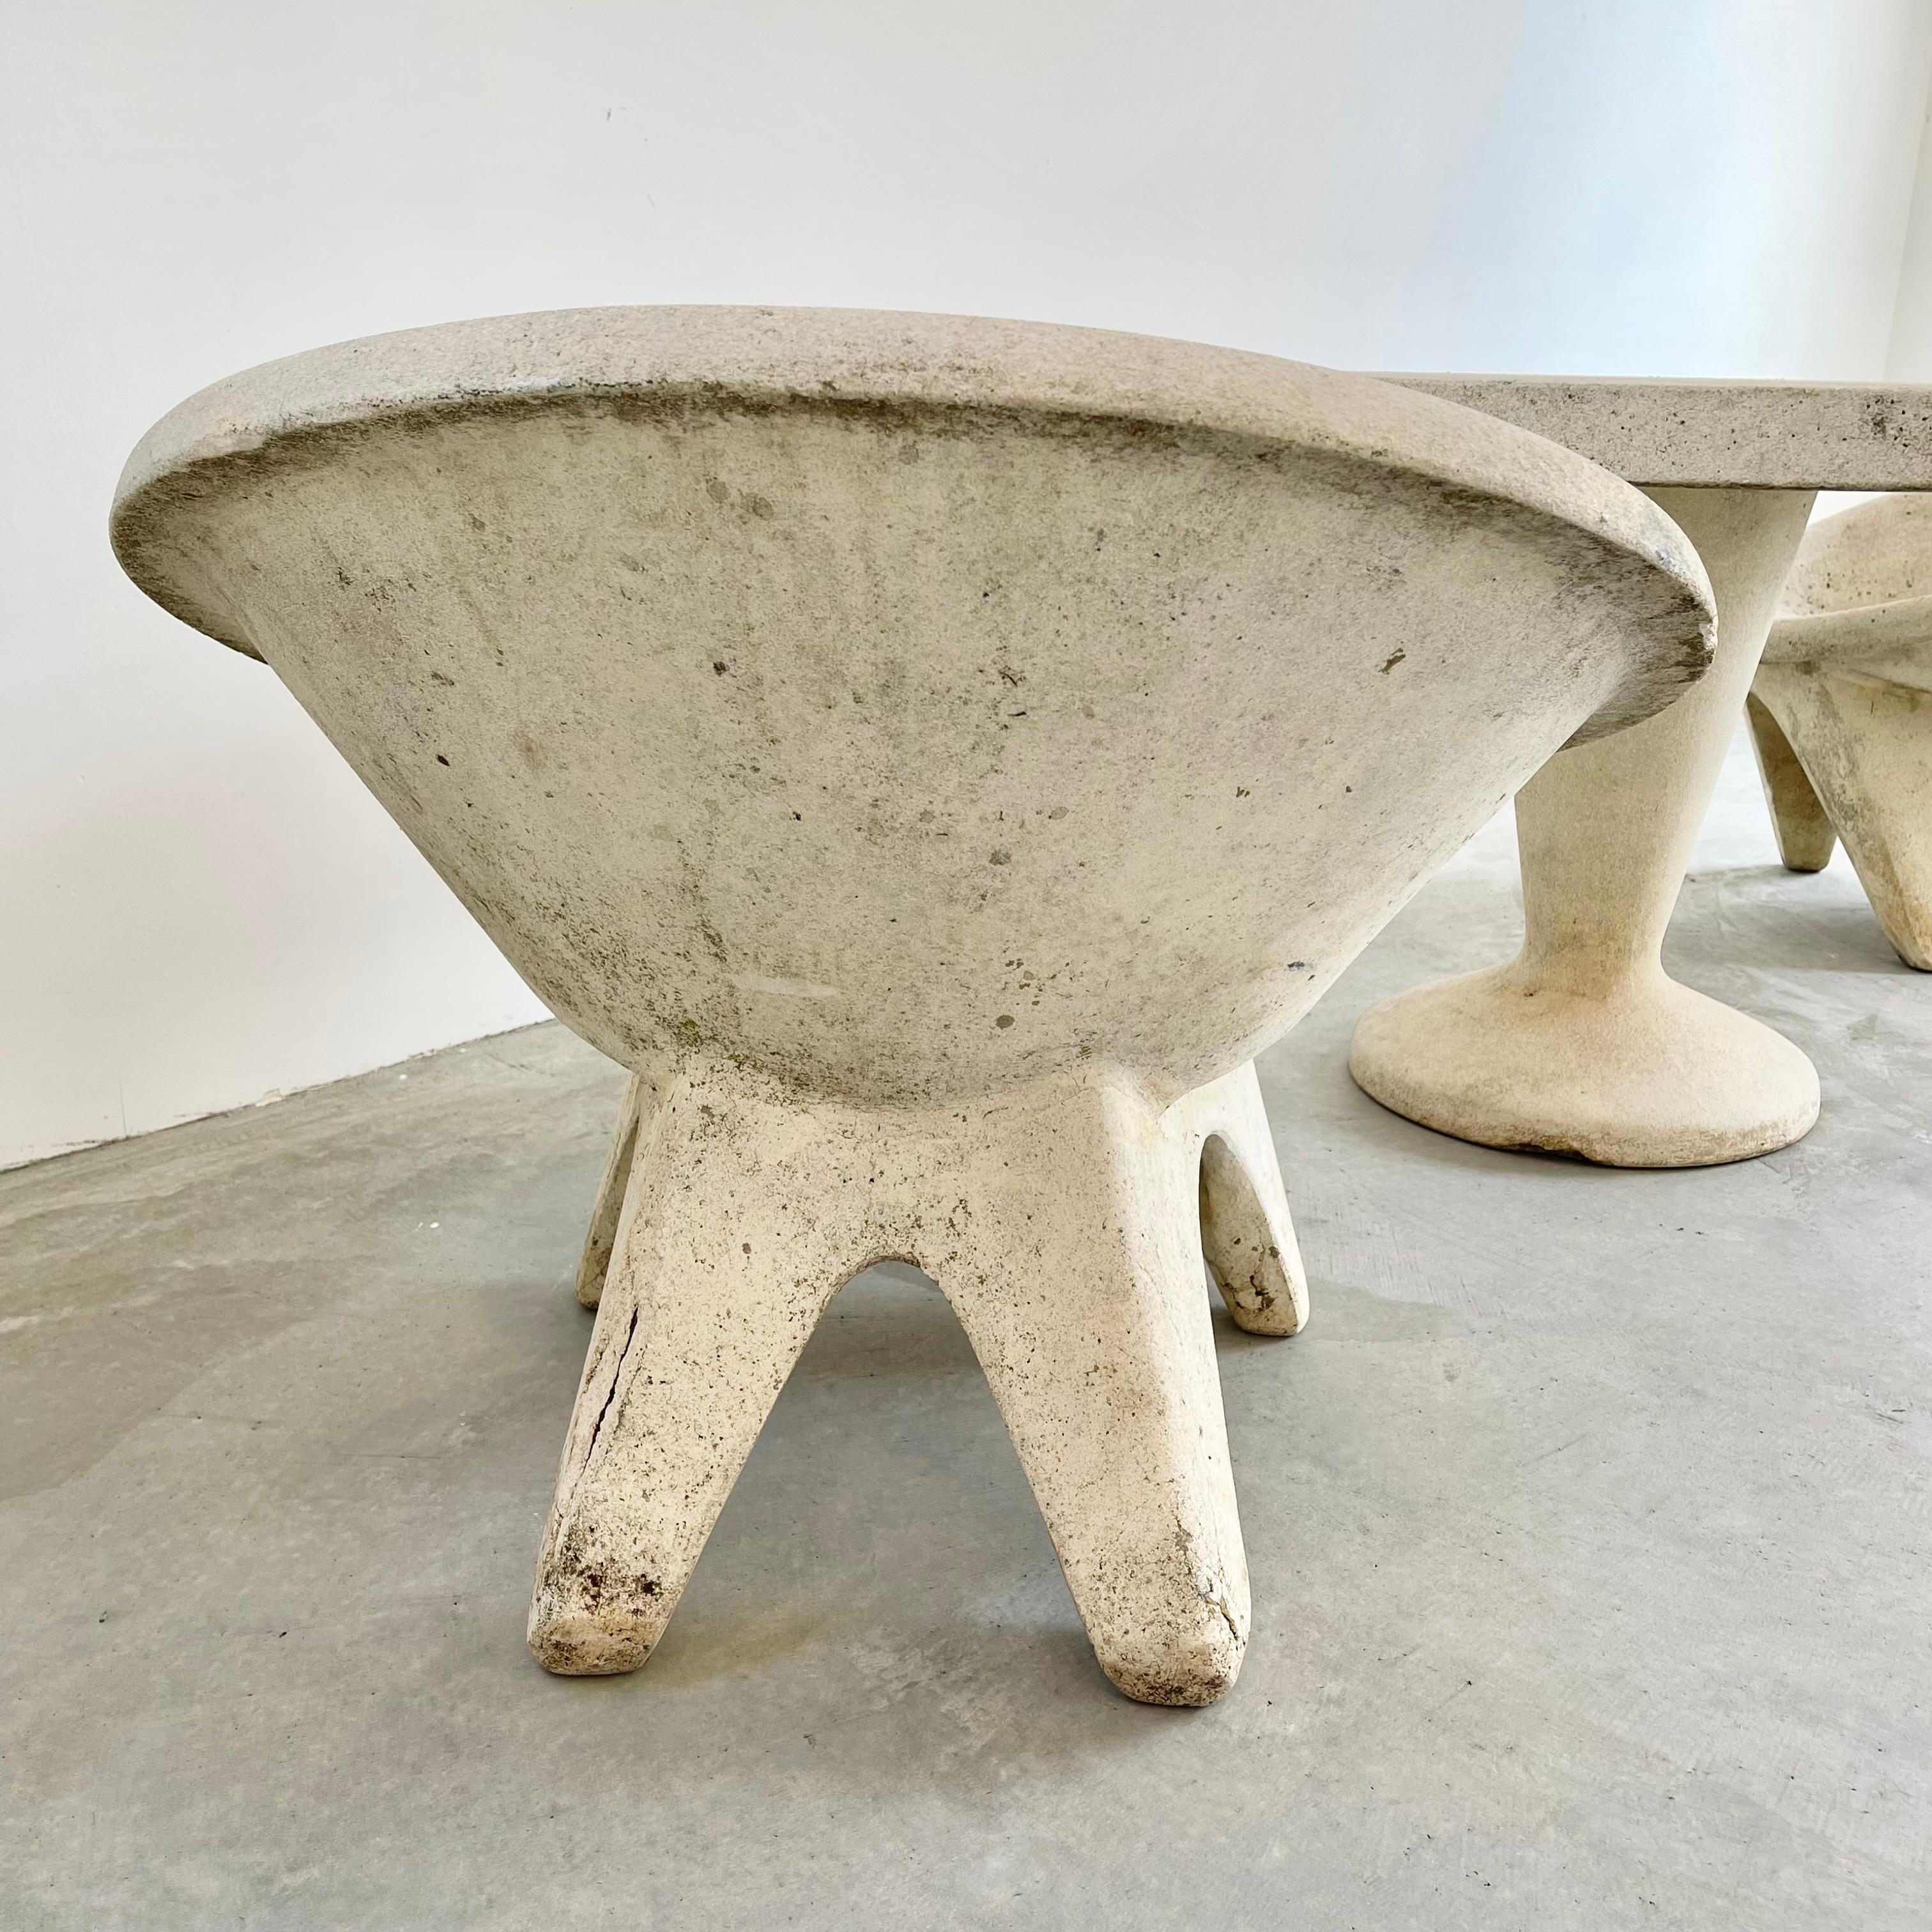 Sculptural Concrete Chairs and Table, 1960s Switzerland 5